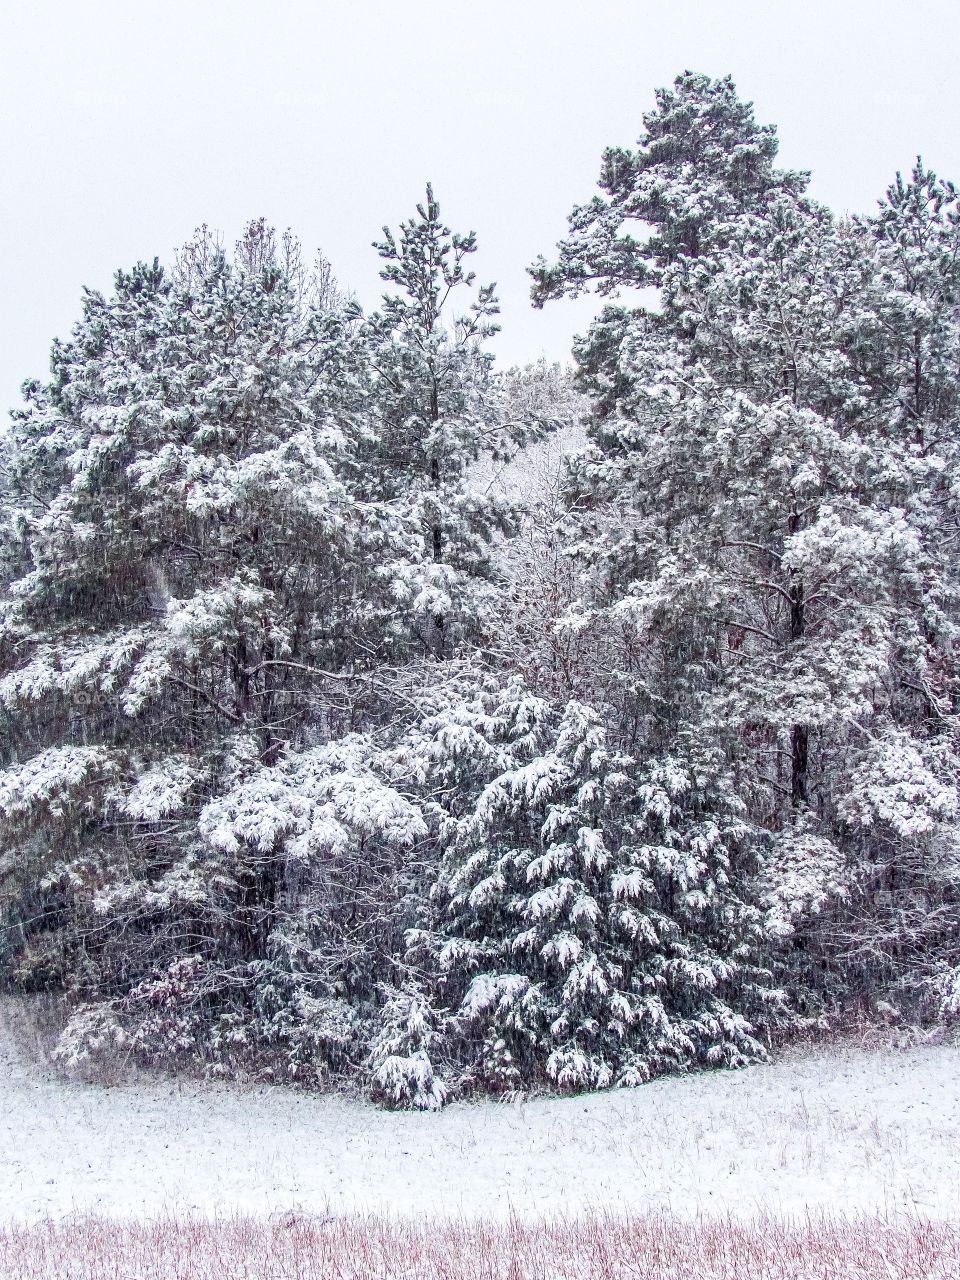 snowing on the pines